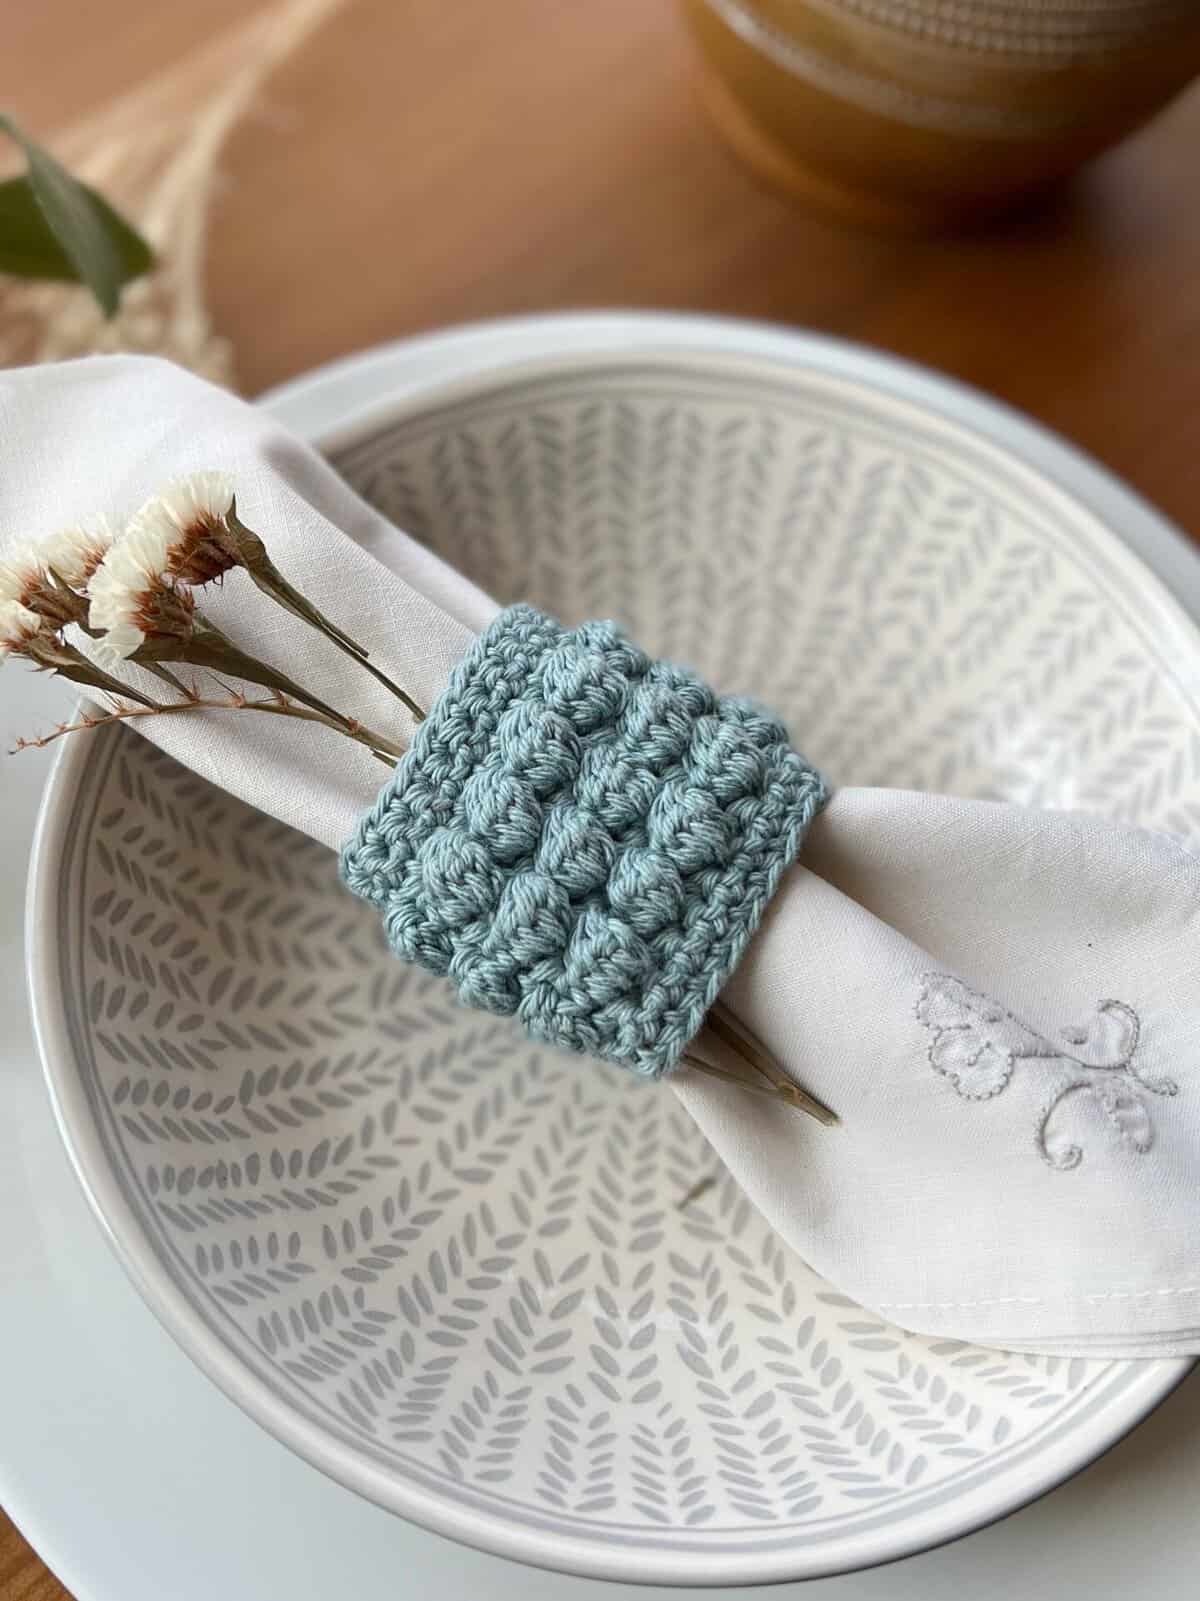 Crochet napkin ring with linen napkin and sprig of flowers.